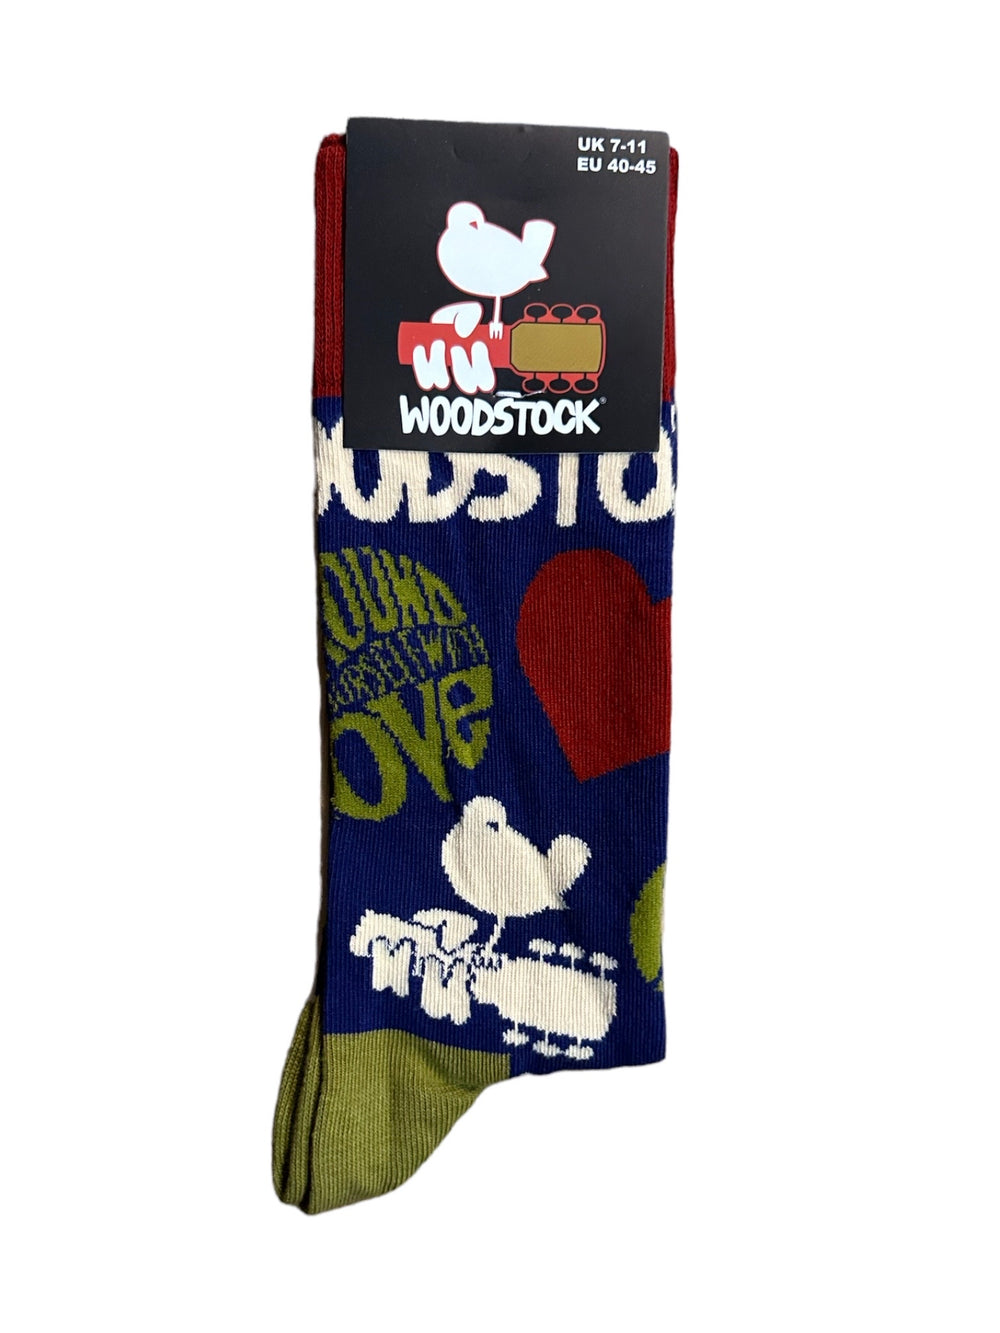 Woodstock Surround Yourself Navy Official Product 1 Pair Jacquard Socks Brand New